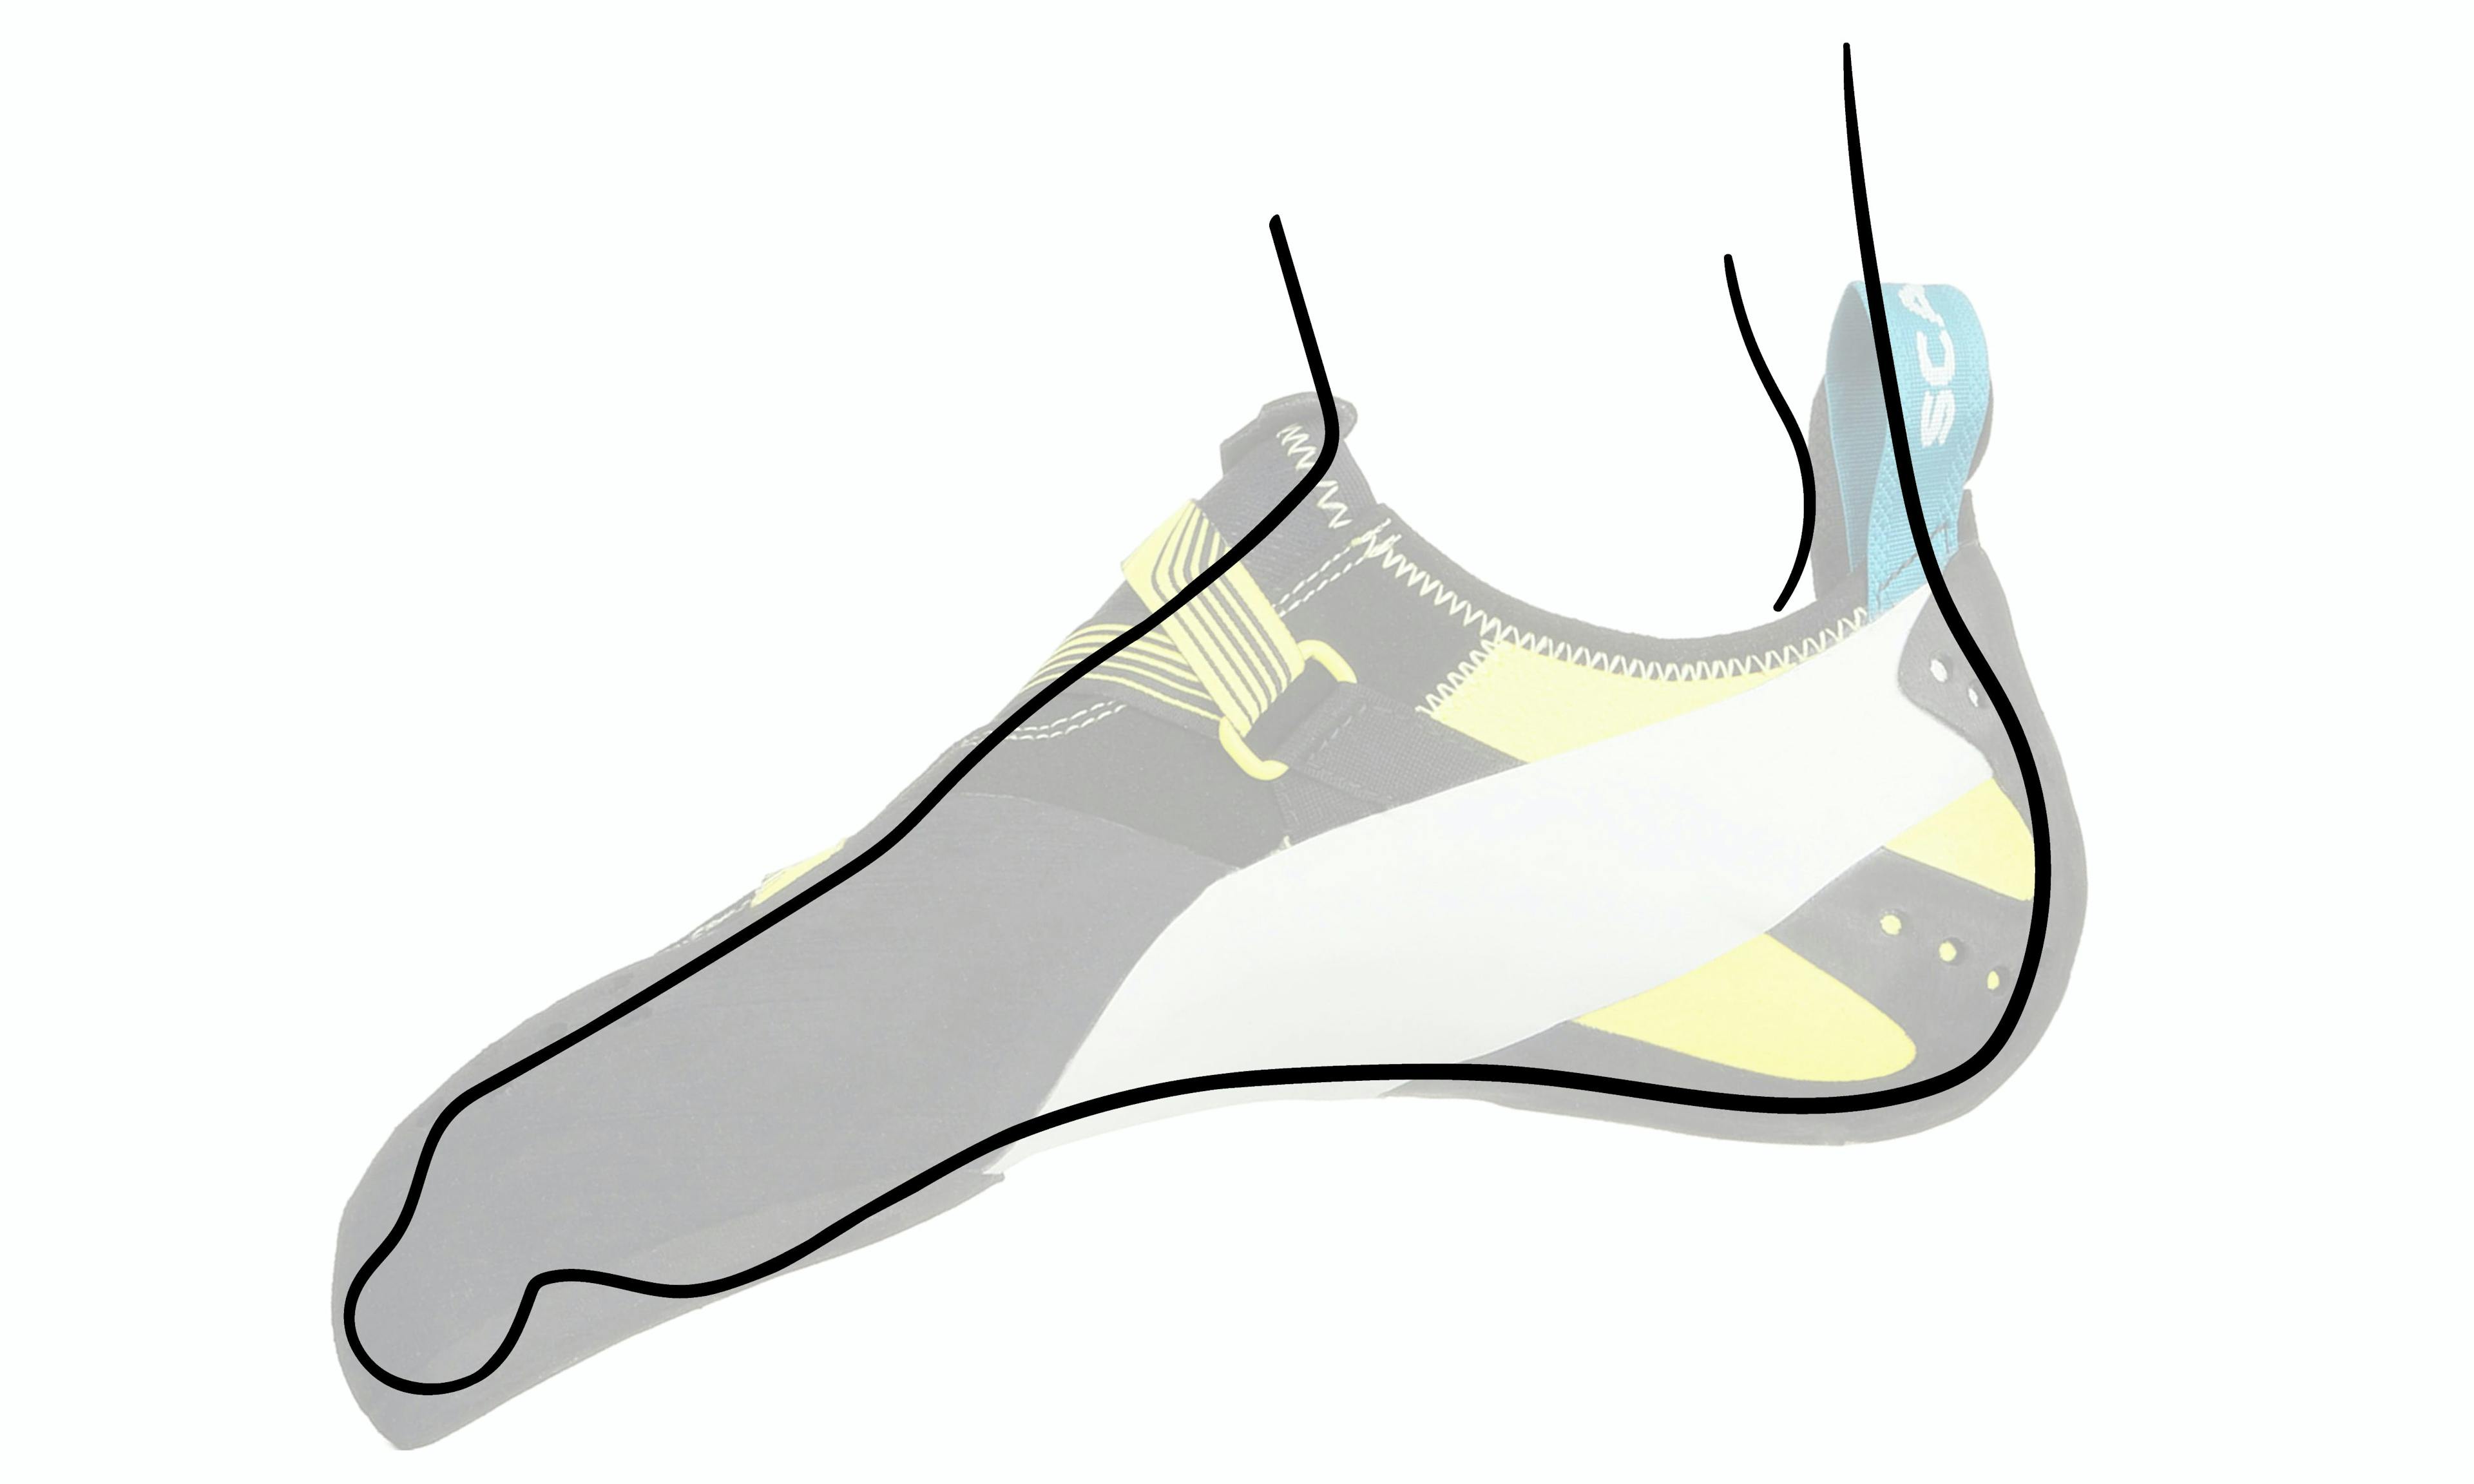 Image showing how a foot should fit in a climbing shoe